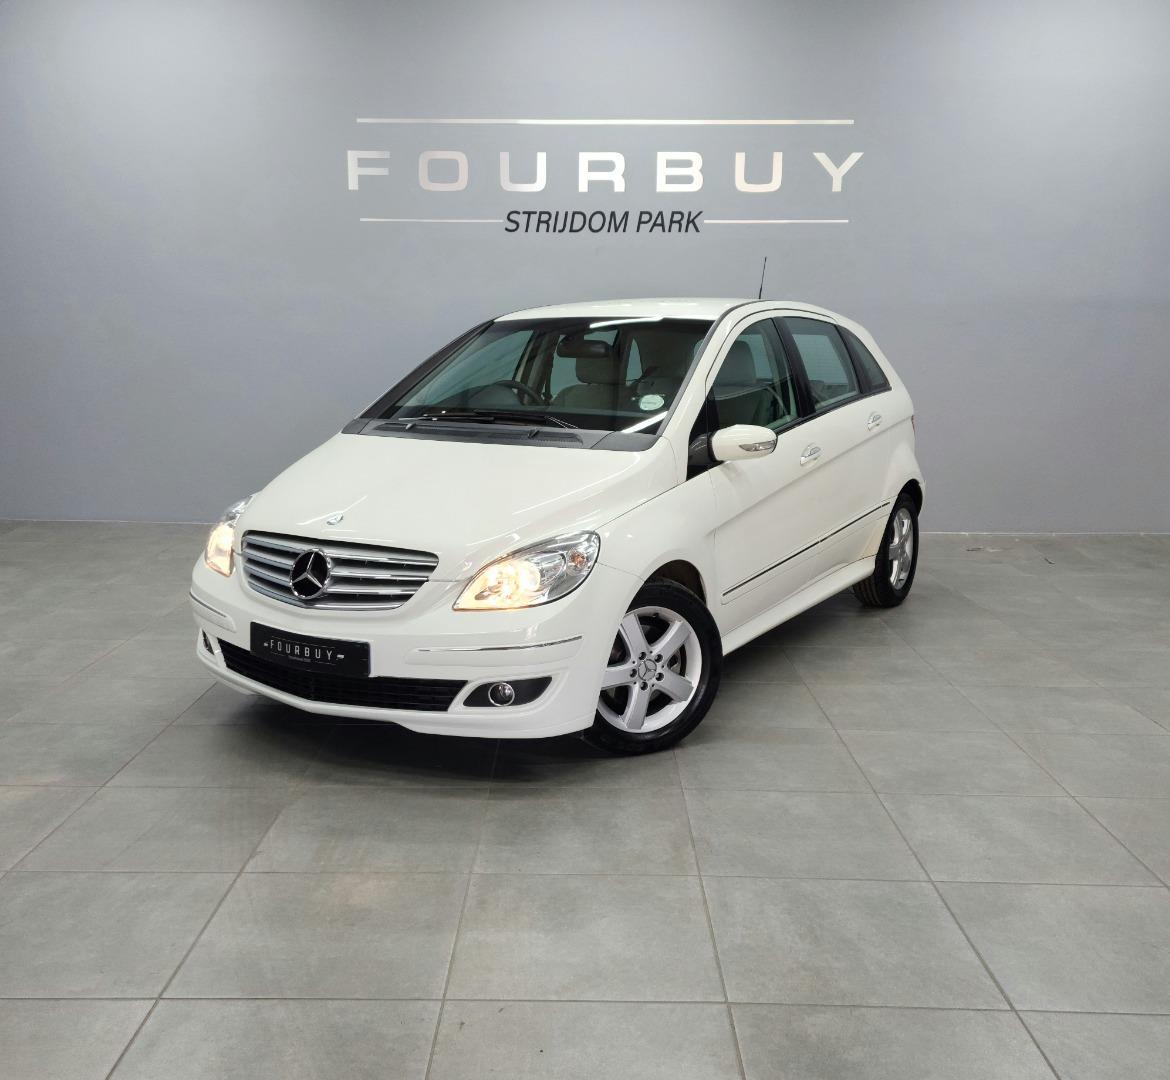 2007 Mercedes-Benz B-Class B200 Turbo For Sale